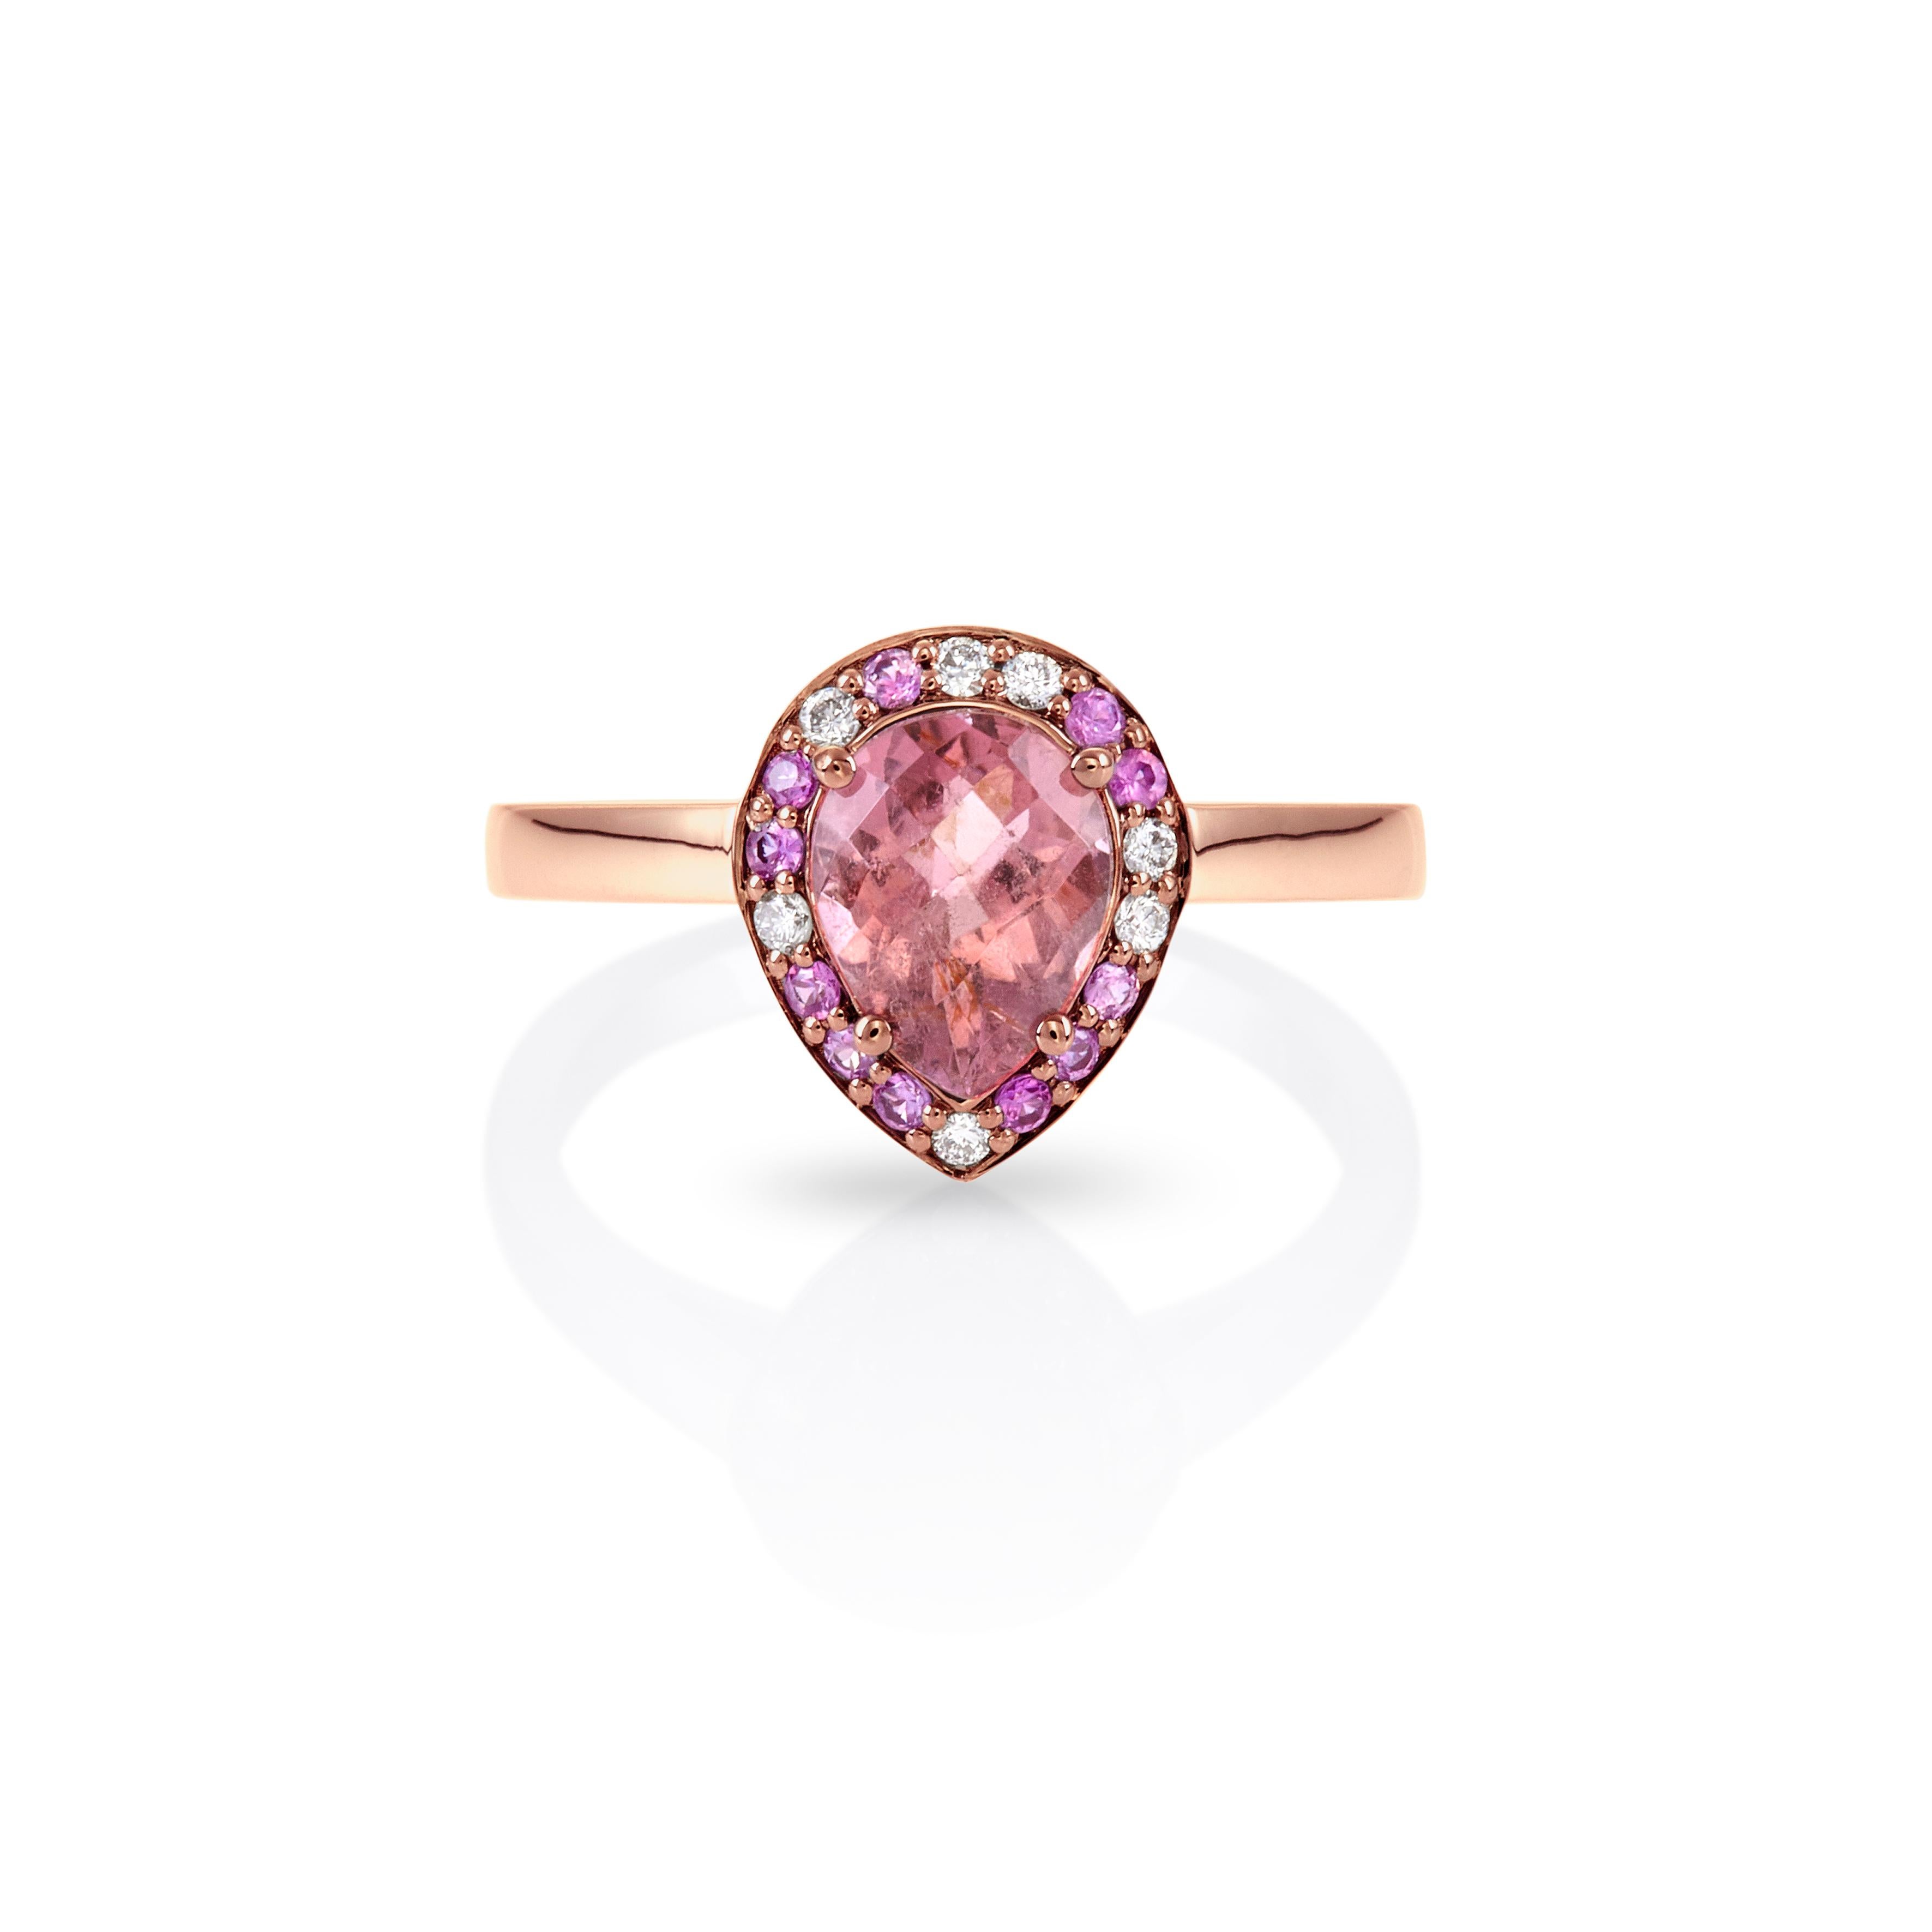 For Sale:  Colorful Drop Ring 18Kt White Gold with Red Tourmaline Pink Saphires and Diamond 8